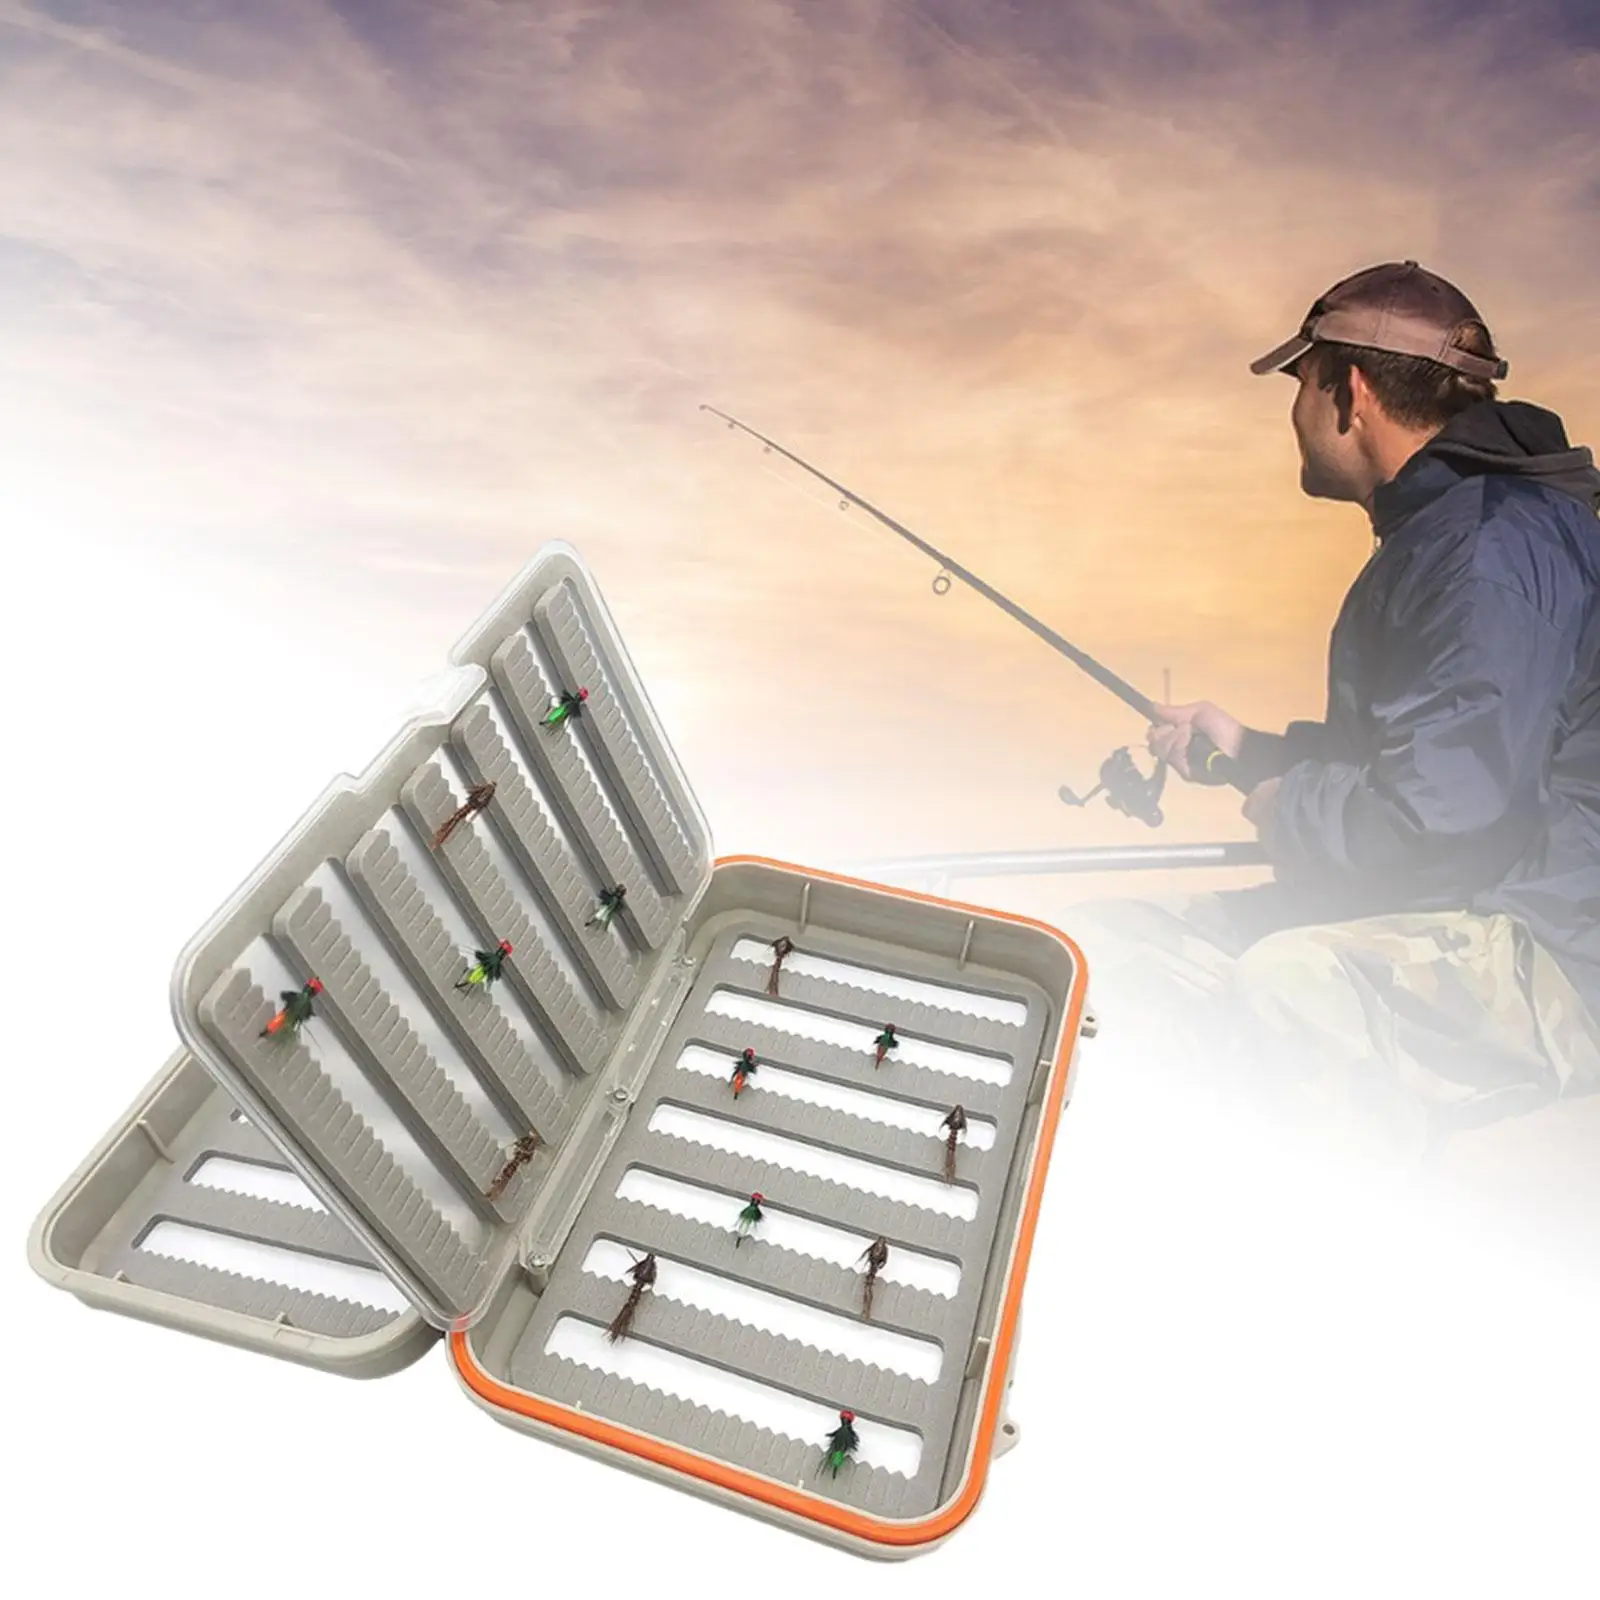 Waterproof Fly Box 4 Sided Organizing Jig Box Organizer Fly Fishing Storage Case for Bass Trout Gear Flies Fishing Lures Dry Fly